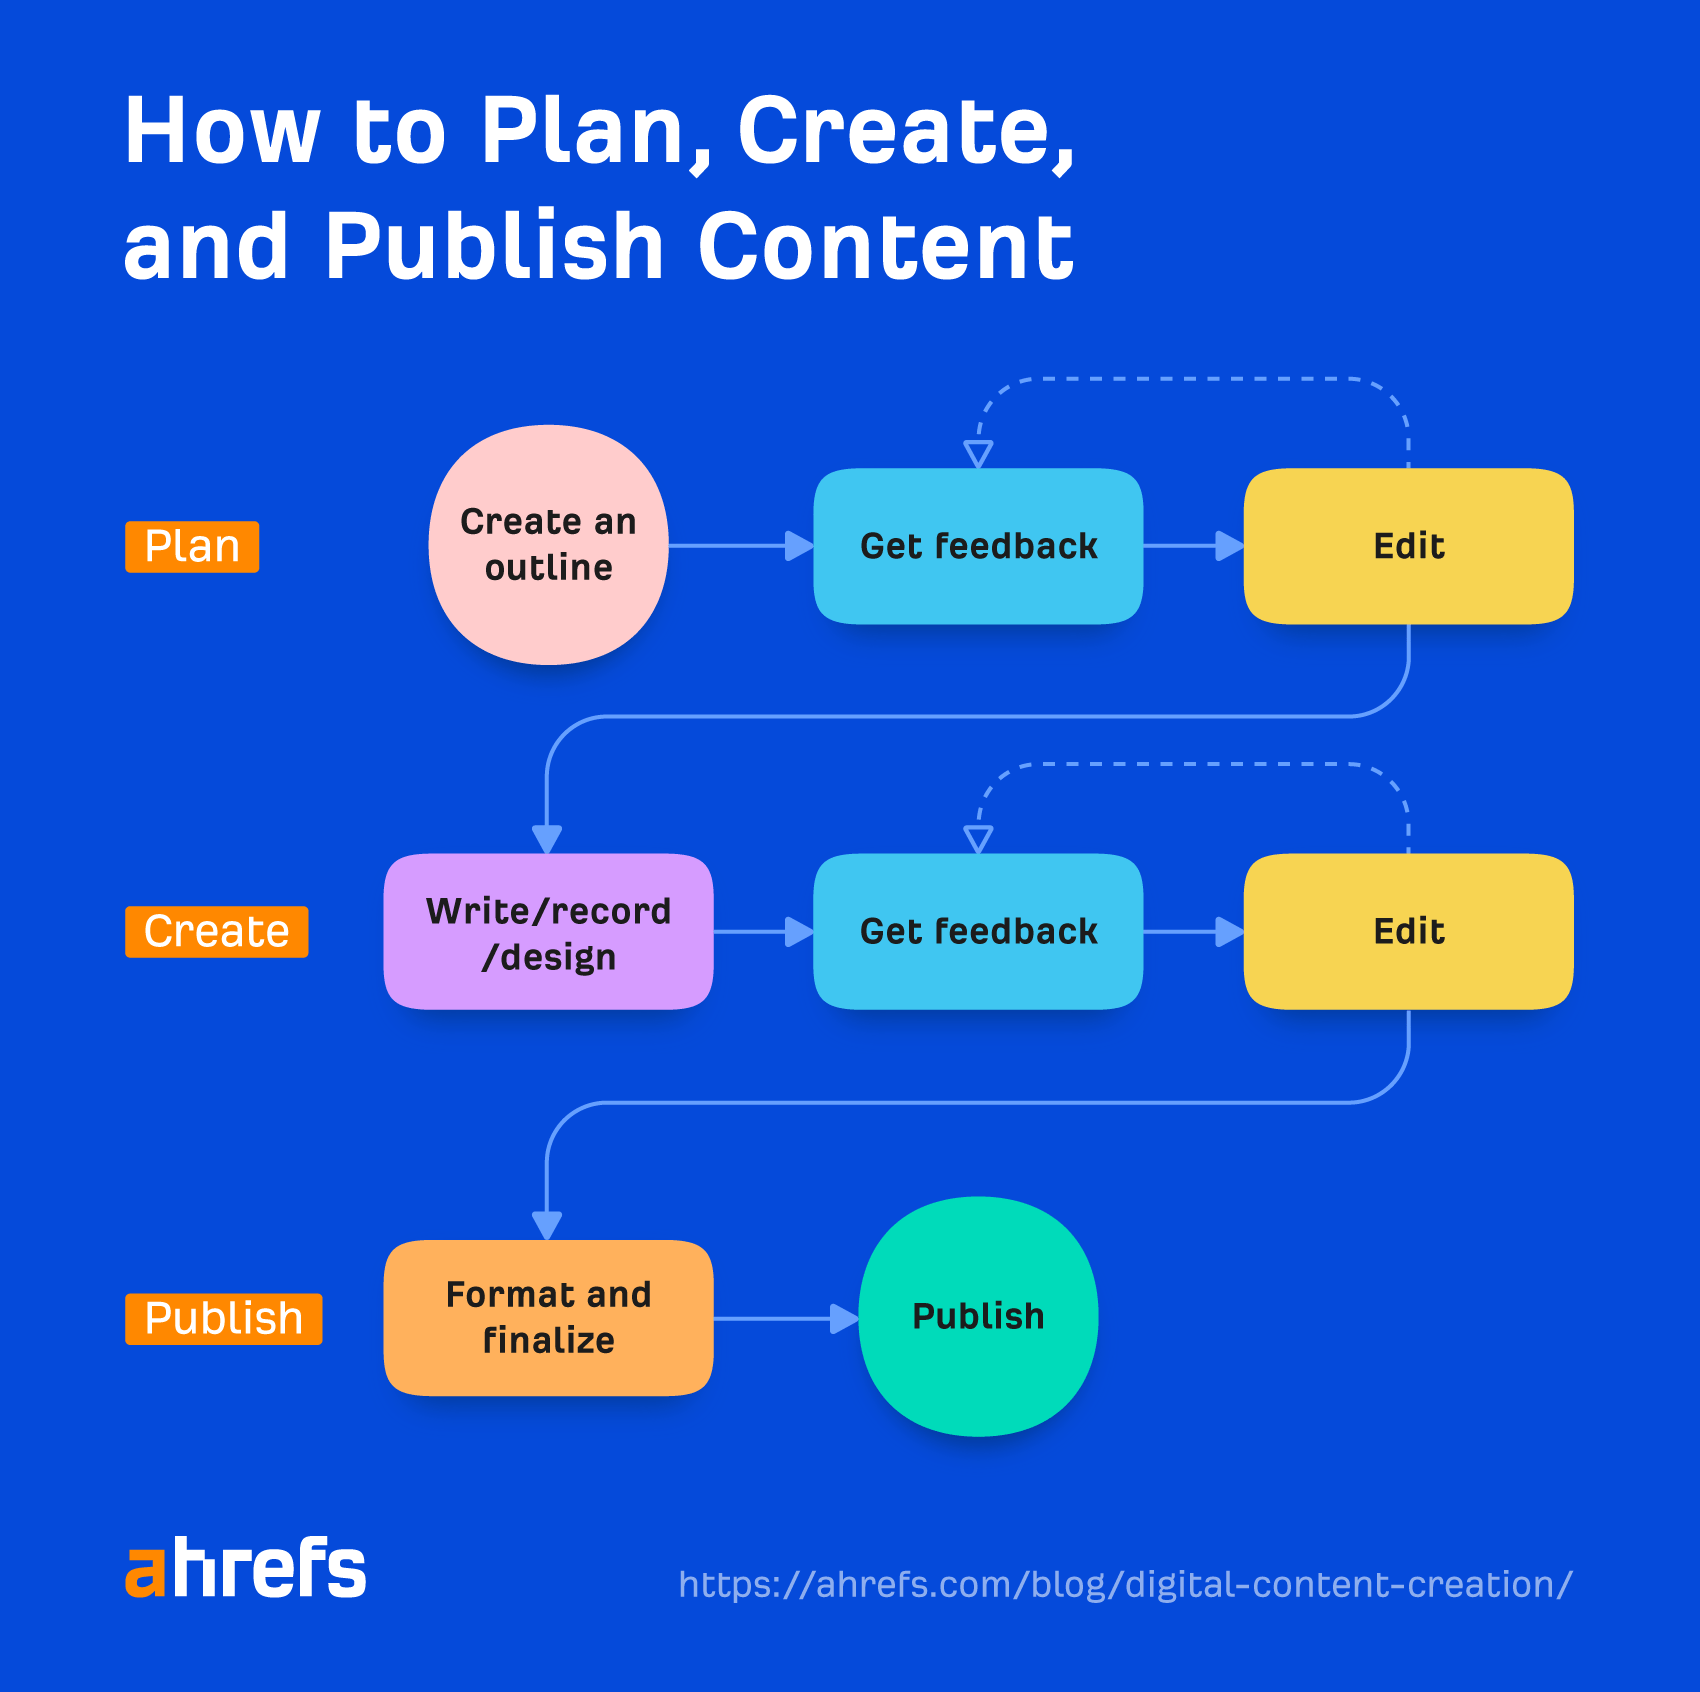 Flowchart showing how to plan, create, and publish content